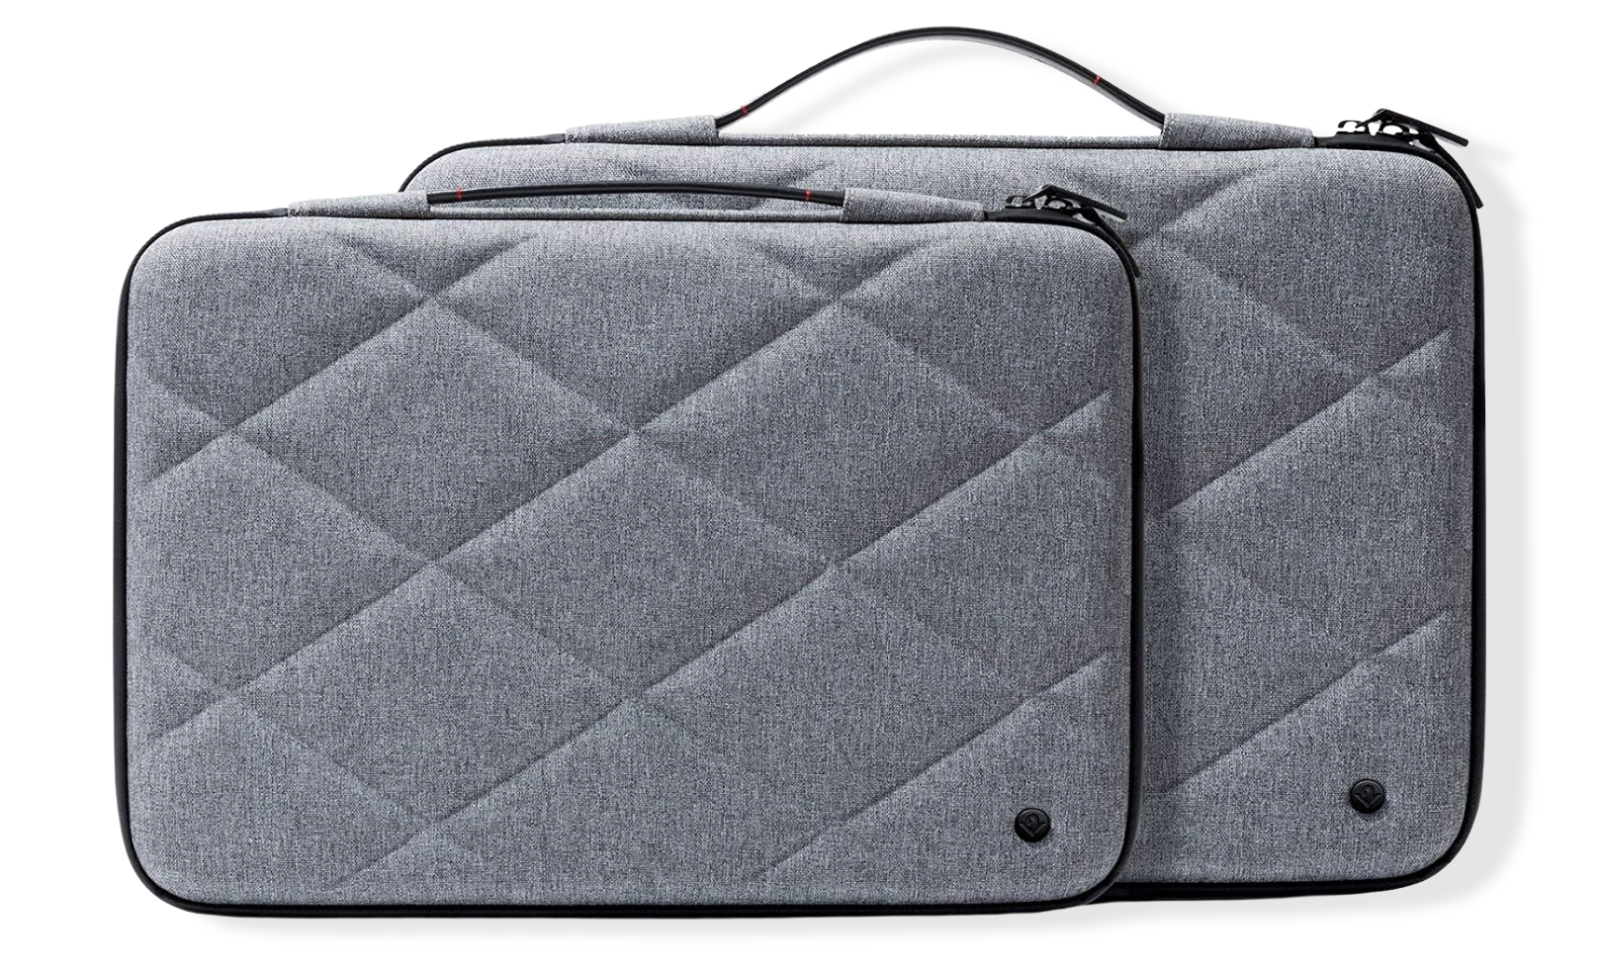 Twelve South Case for MacBook Suitcase, 13 Inch Laptop - Ricky's Garage